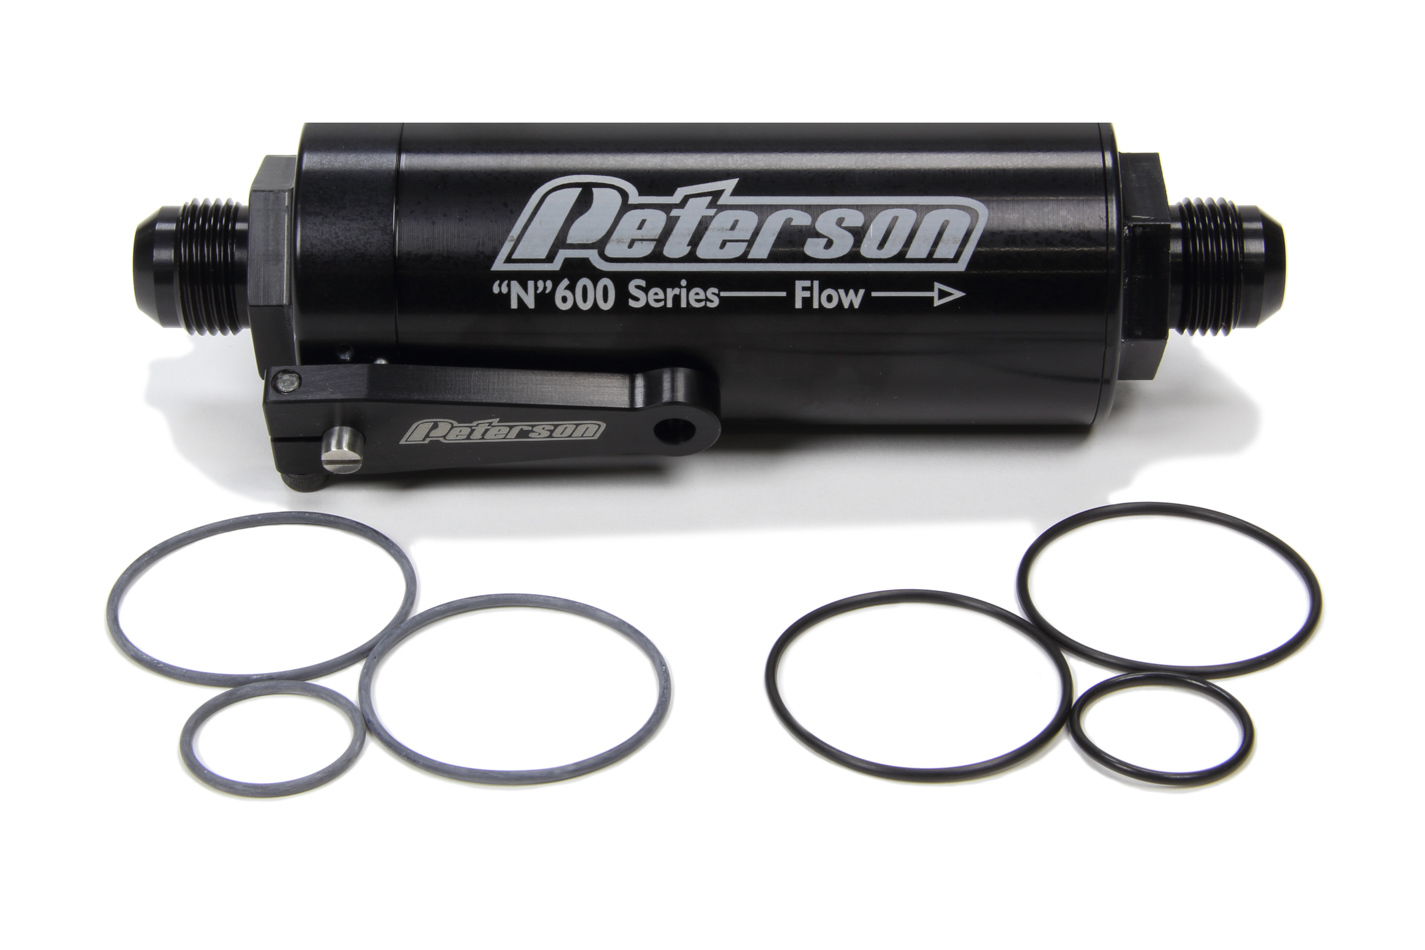 Peterson Fluid 09-0602 Fuel Filter, 600 Series, In-Line, 45 Micron, Stainless Element, 10 AN Male Inlet, 10 AN Male Outlet, Shut Off Valve, Aluminum, Black Anodized, Each